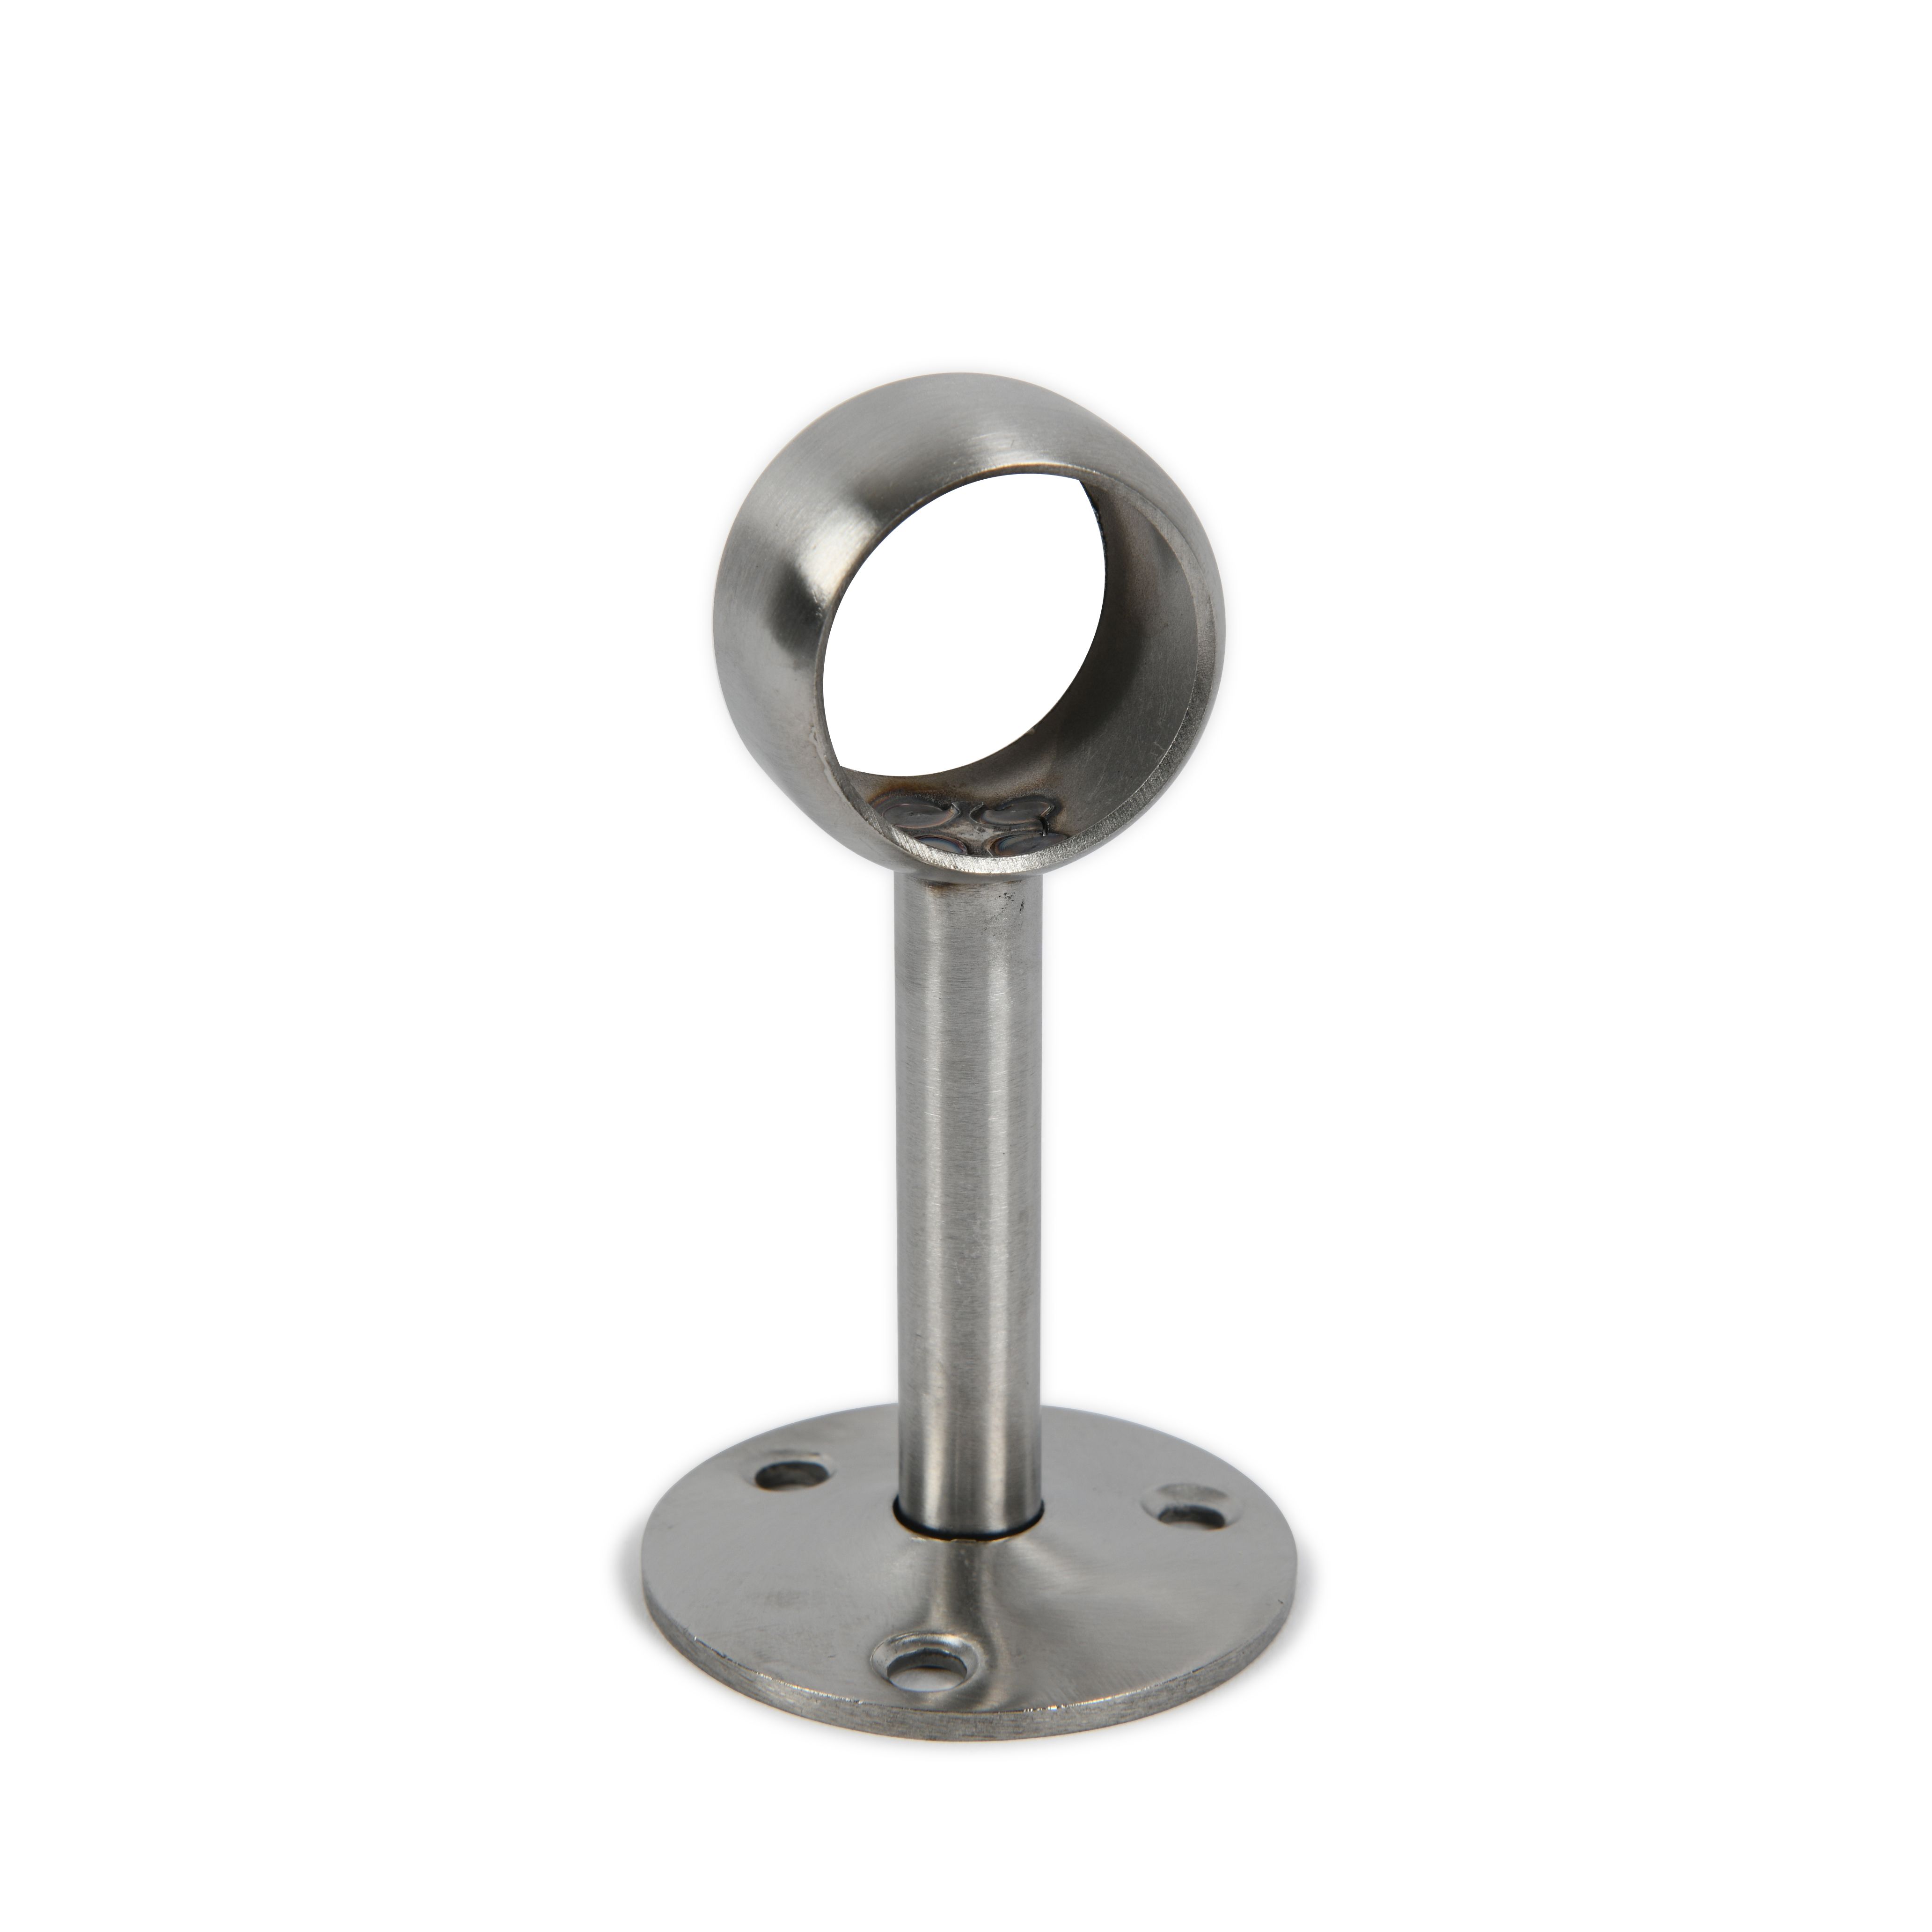 Colorail Polished Chrome effect Stainless steel Rail centre socket (L)19mm (Dia)19mm